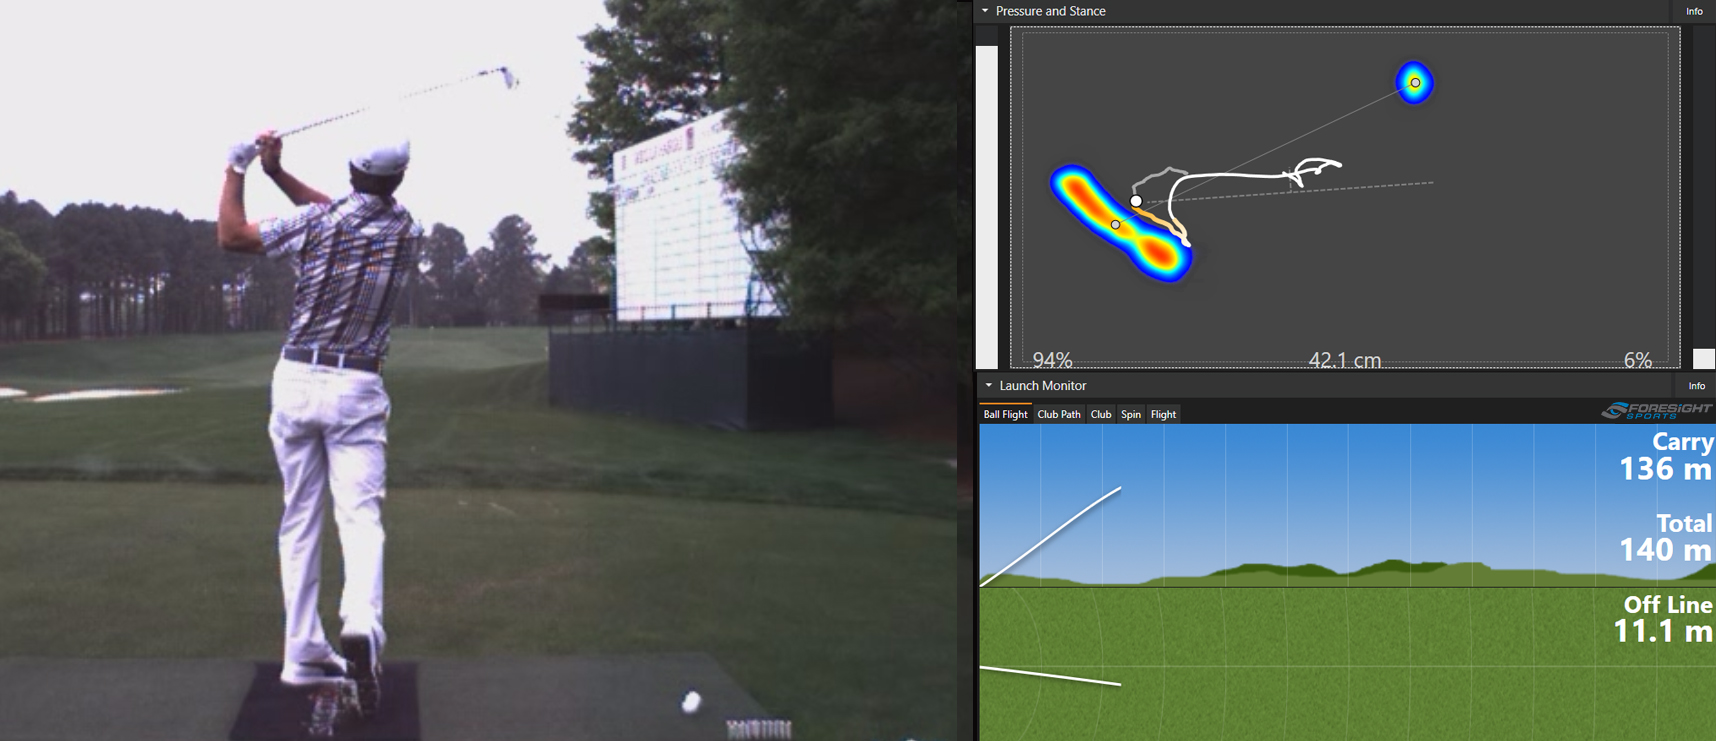 Ball/club tracking data is synced with the Motion Plate